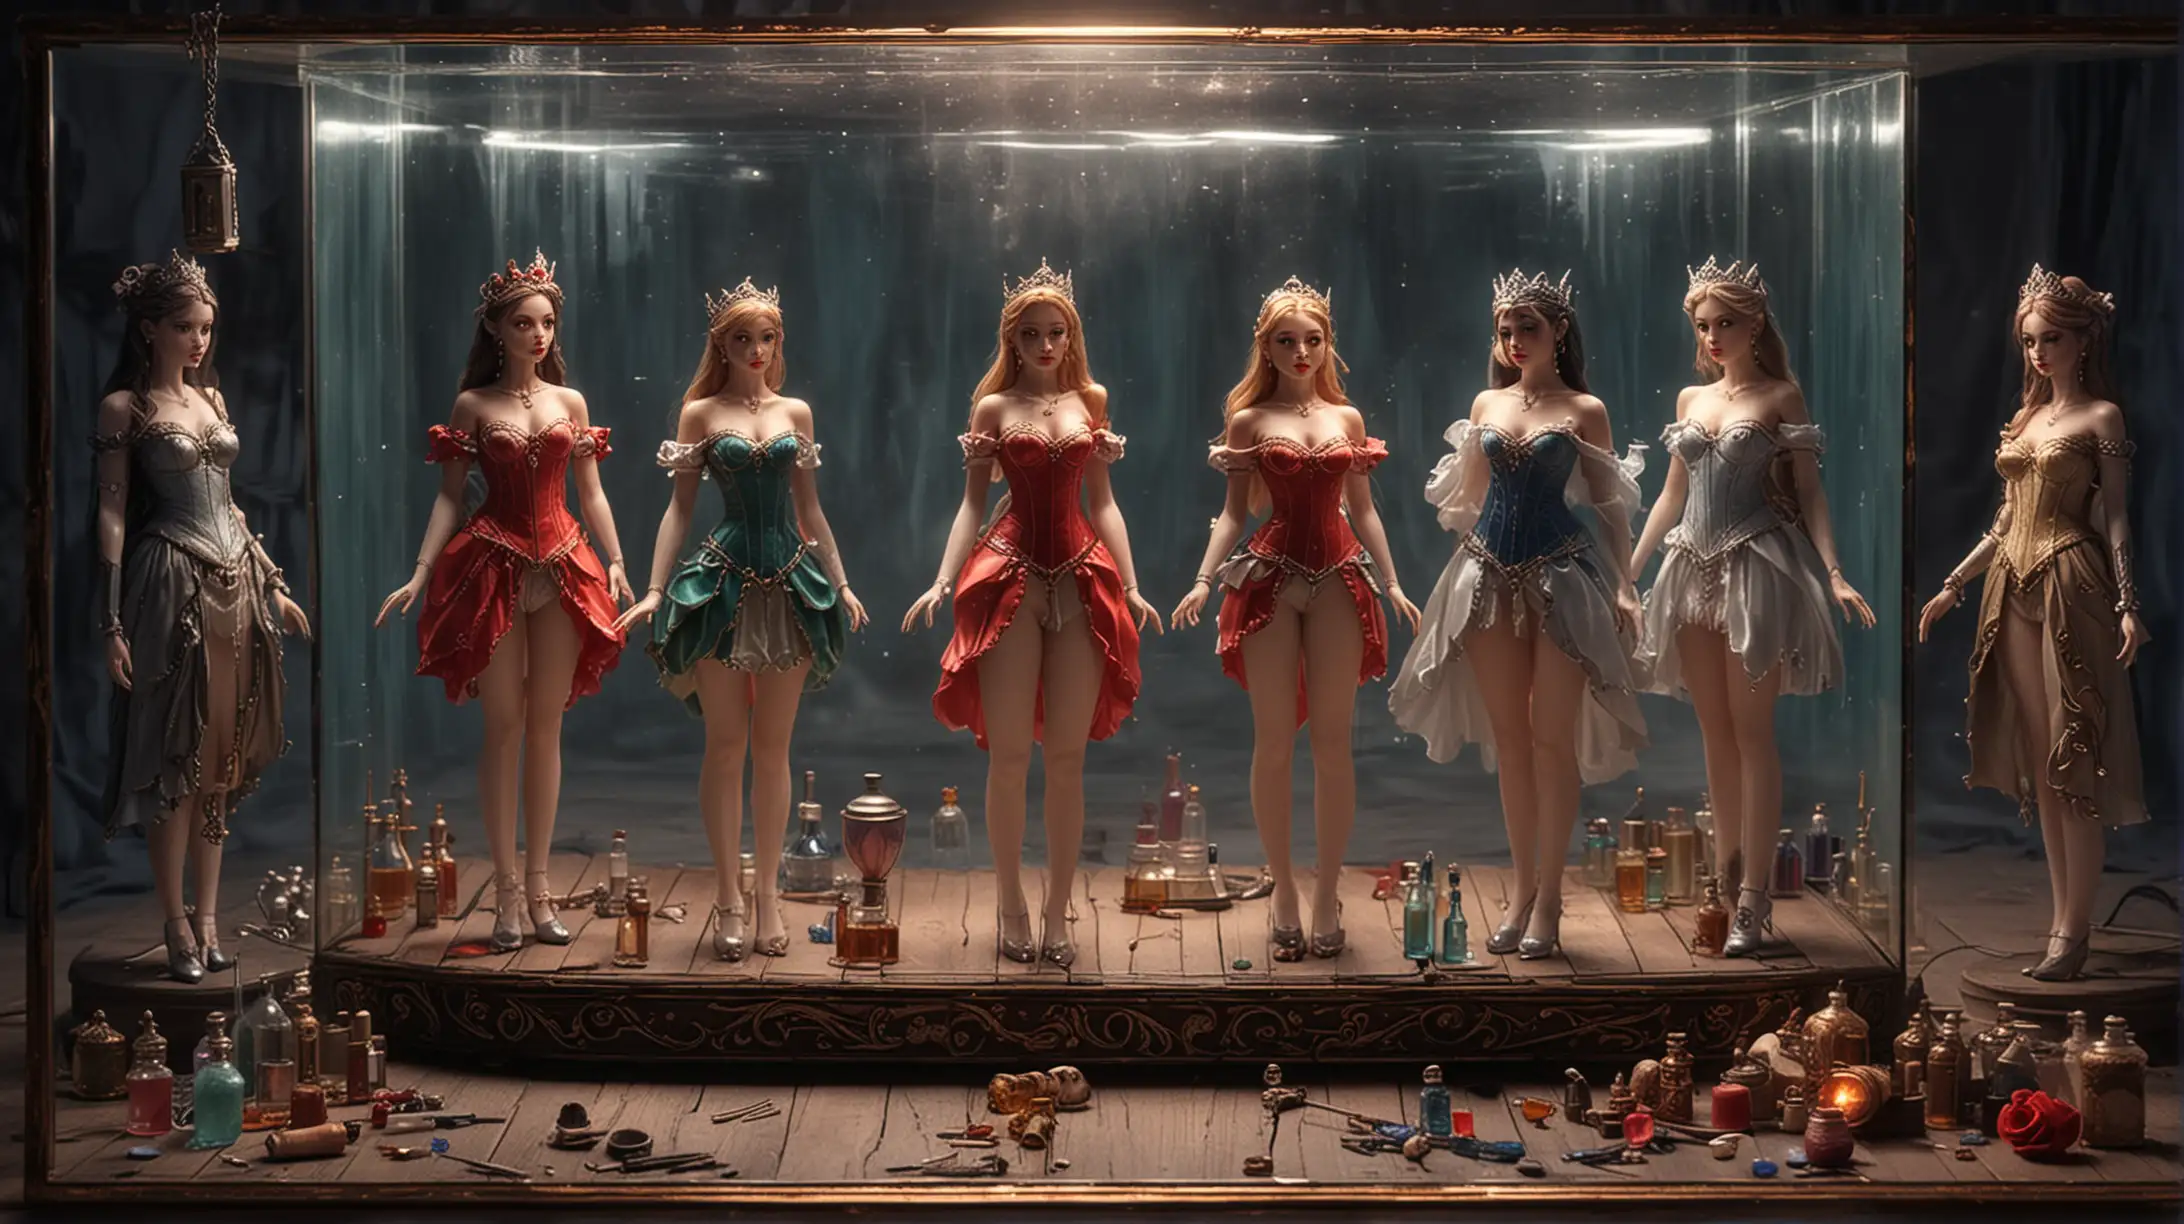 Subject: several 1/4 size princesses fully inside  (((miniature glowing glass box)))
Background/Setting: The scene is an alchemist's lab with vials, potions, test tubes, and a ((( miniature glowing glass box))) on the table with several 1/4 size princesses inside.
Style/Coloring: The image is highly detailed, likely featuring intricate designs on the lingerie and elegant backgrounds.
Action: Several 1/4 size princesses is mesmerized facing a dark character. Her posture and expression convey resignation to her new fate.
Items/Costume: The 1/4-size elf princesses are wearing erotic bras and thongs of various colors, with accessories such as earrings, a collar, a tiara, a garter belt, stockings, and high heels. They are wearing red lipstick and heavy makeup, which contributes to their royal and seductive appearance.  